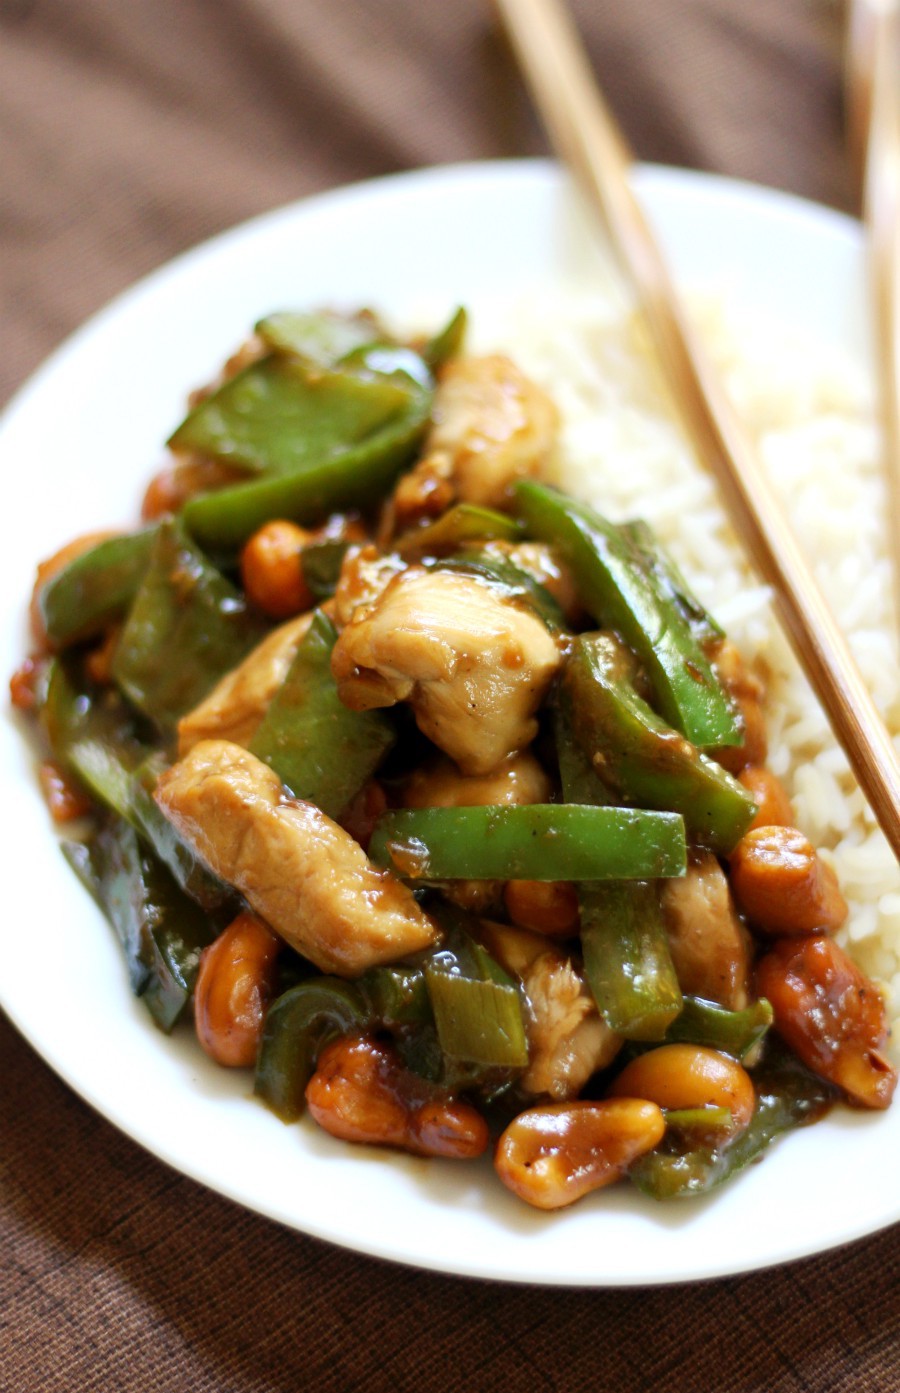 Chinese Cashew Chicken (Gluten-Free, Soy-Free) | Strength and Sunshine @RebeccaGF666 You won't need to spend money on take-out anymore! The best Chinese Cashew Chicken made right at home, gluten-free, and soy-free! A healthier recipe you can make for dinner and have the best leftovers for lunch! #cashewchicken #glutenfree #soyfree #takeout